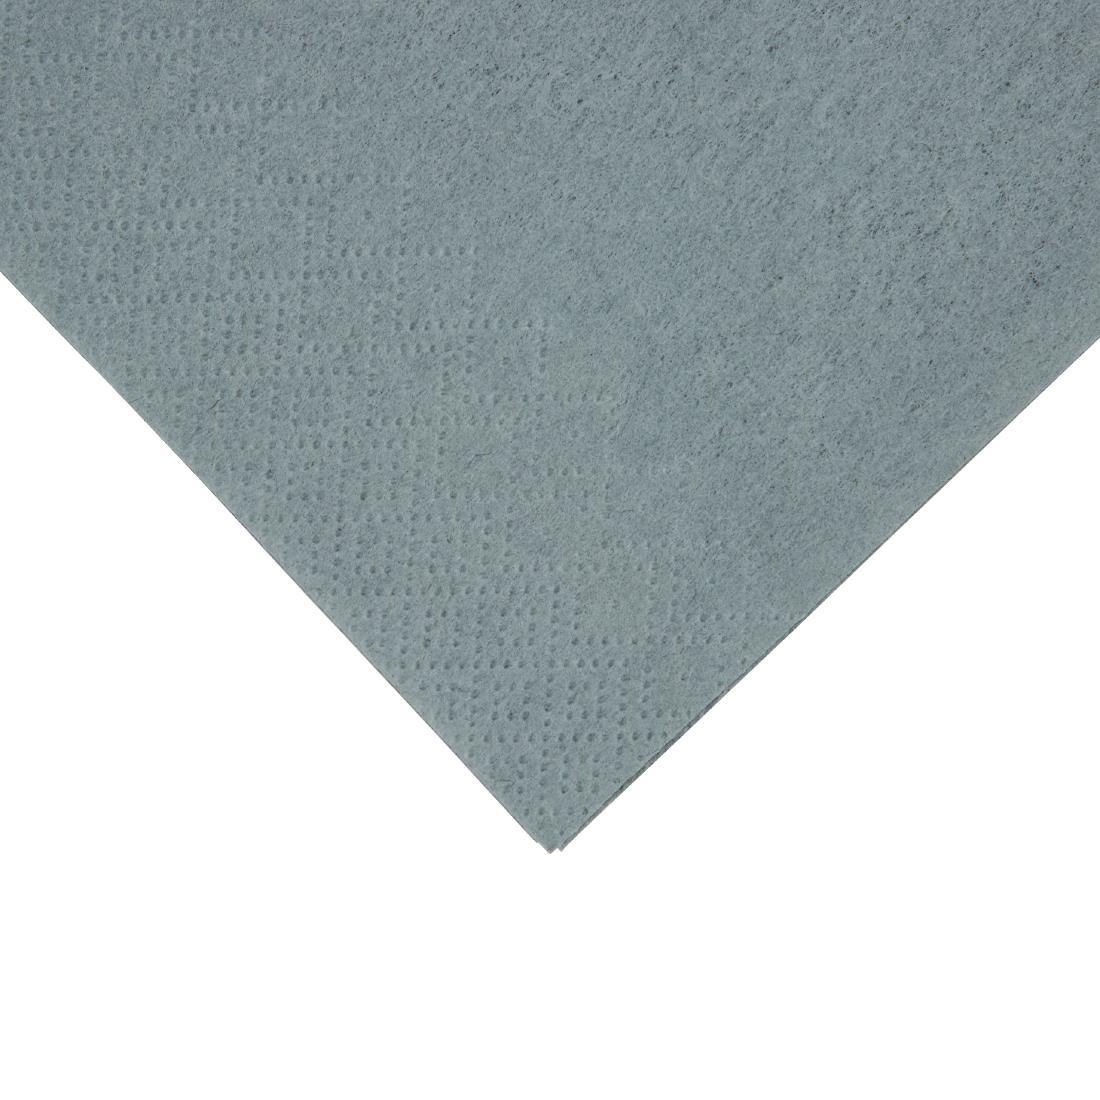 Fiesta Recyclable Dinner Napkin Grey 40x40cm 3ply 1/8 Fold (Pack of 1000) - FE260  - 2